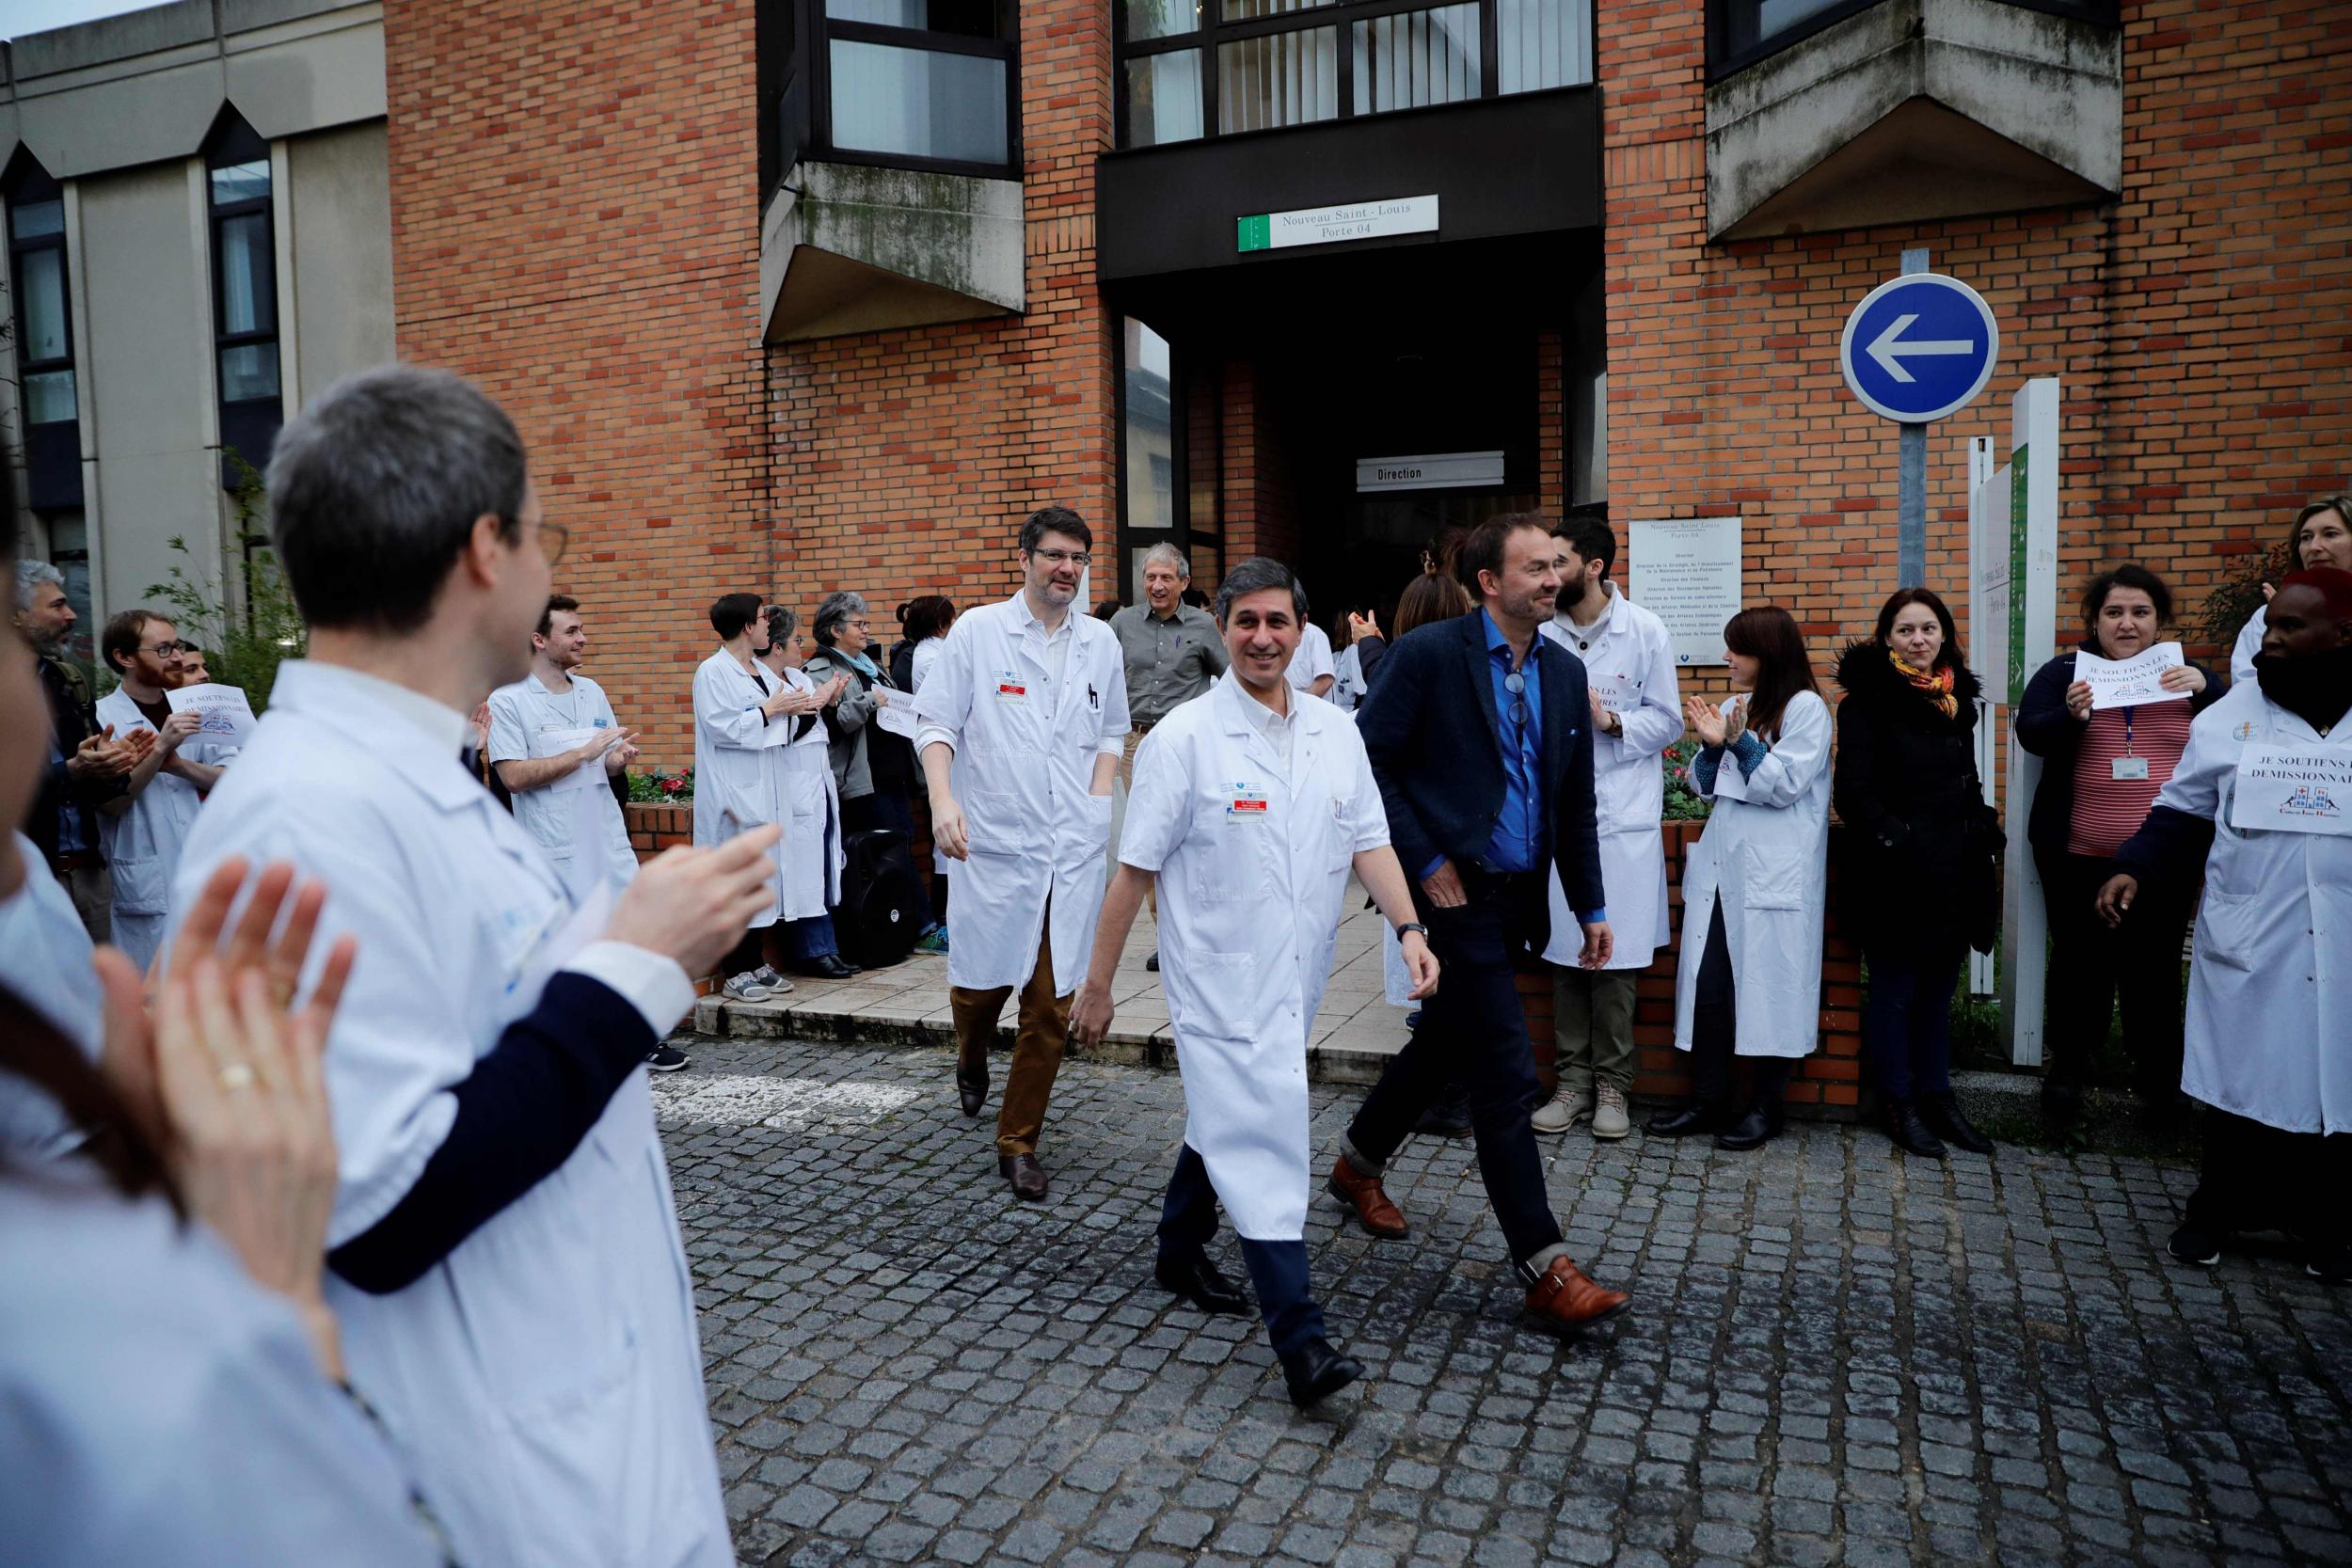 Doctors were protesting in recent months over healthcare problems in France